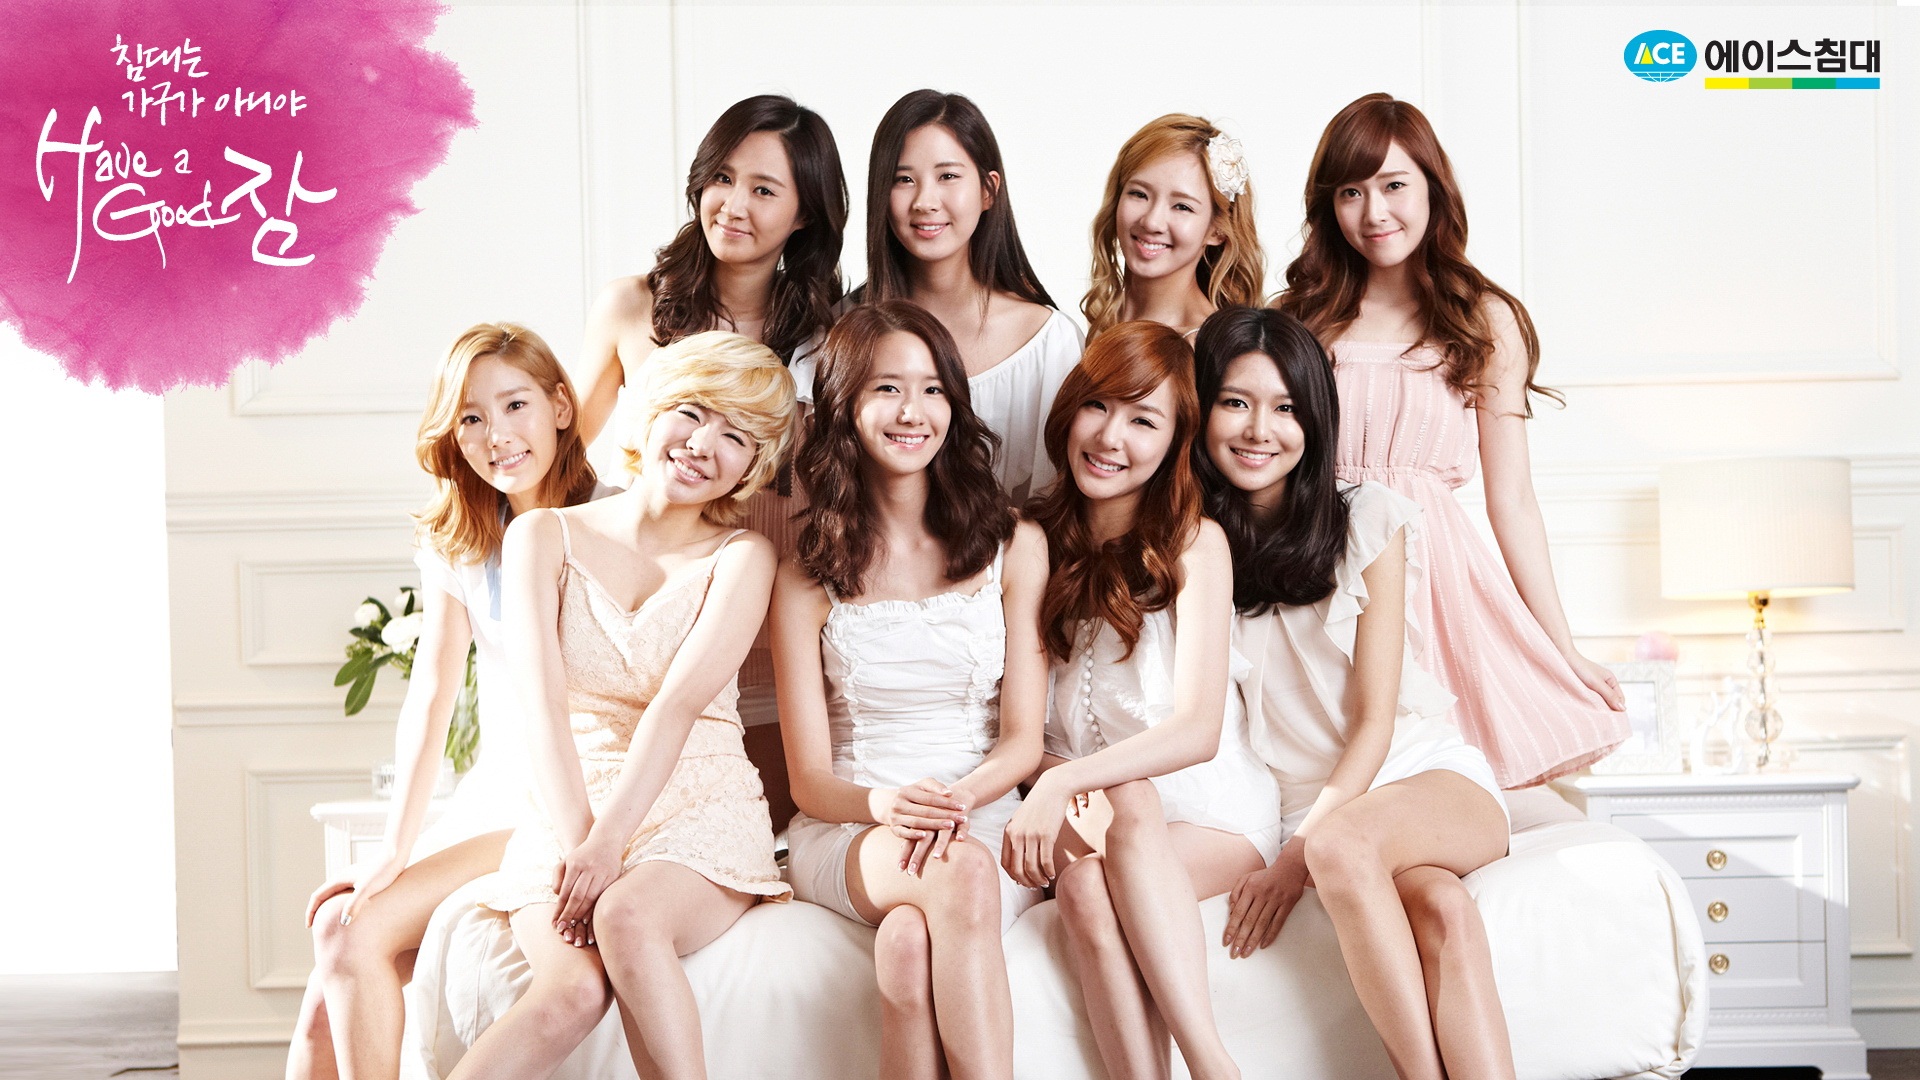 Girls Generation ACE and LG endorsements ads HD wallpapers #1 - 1920x1080